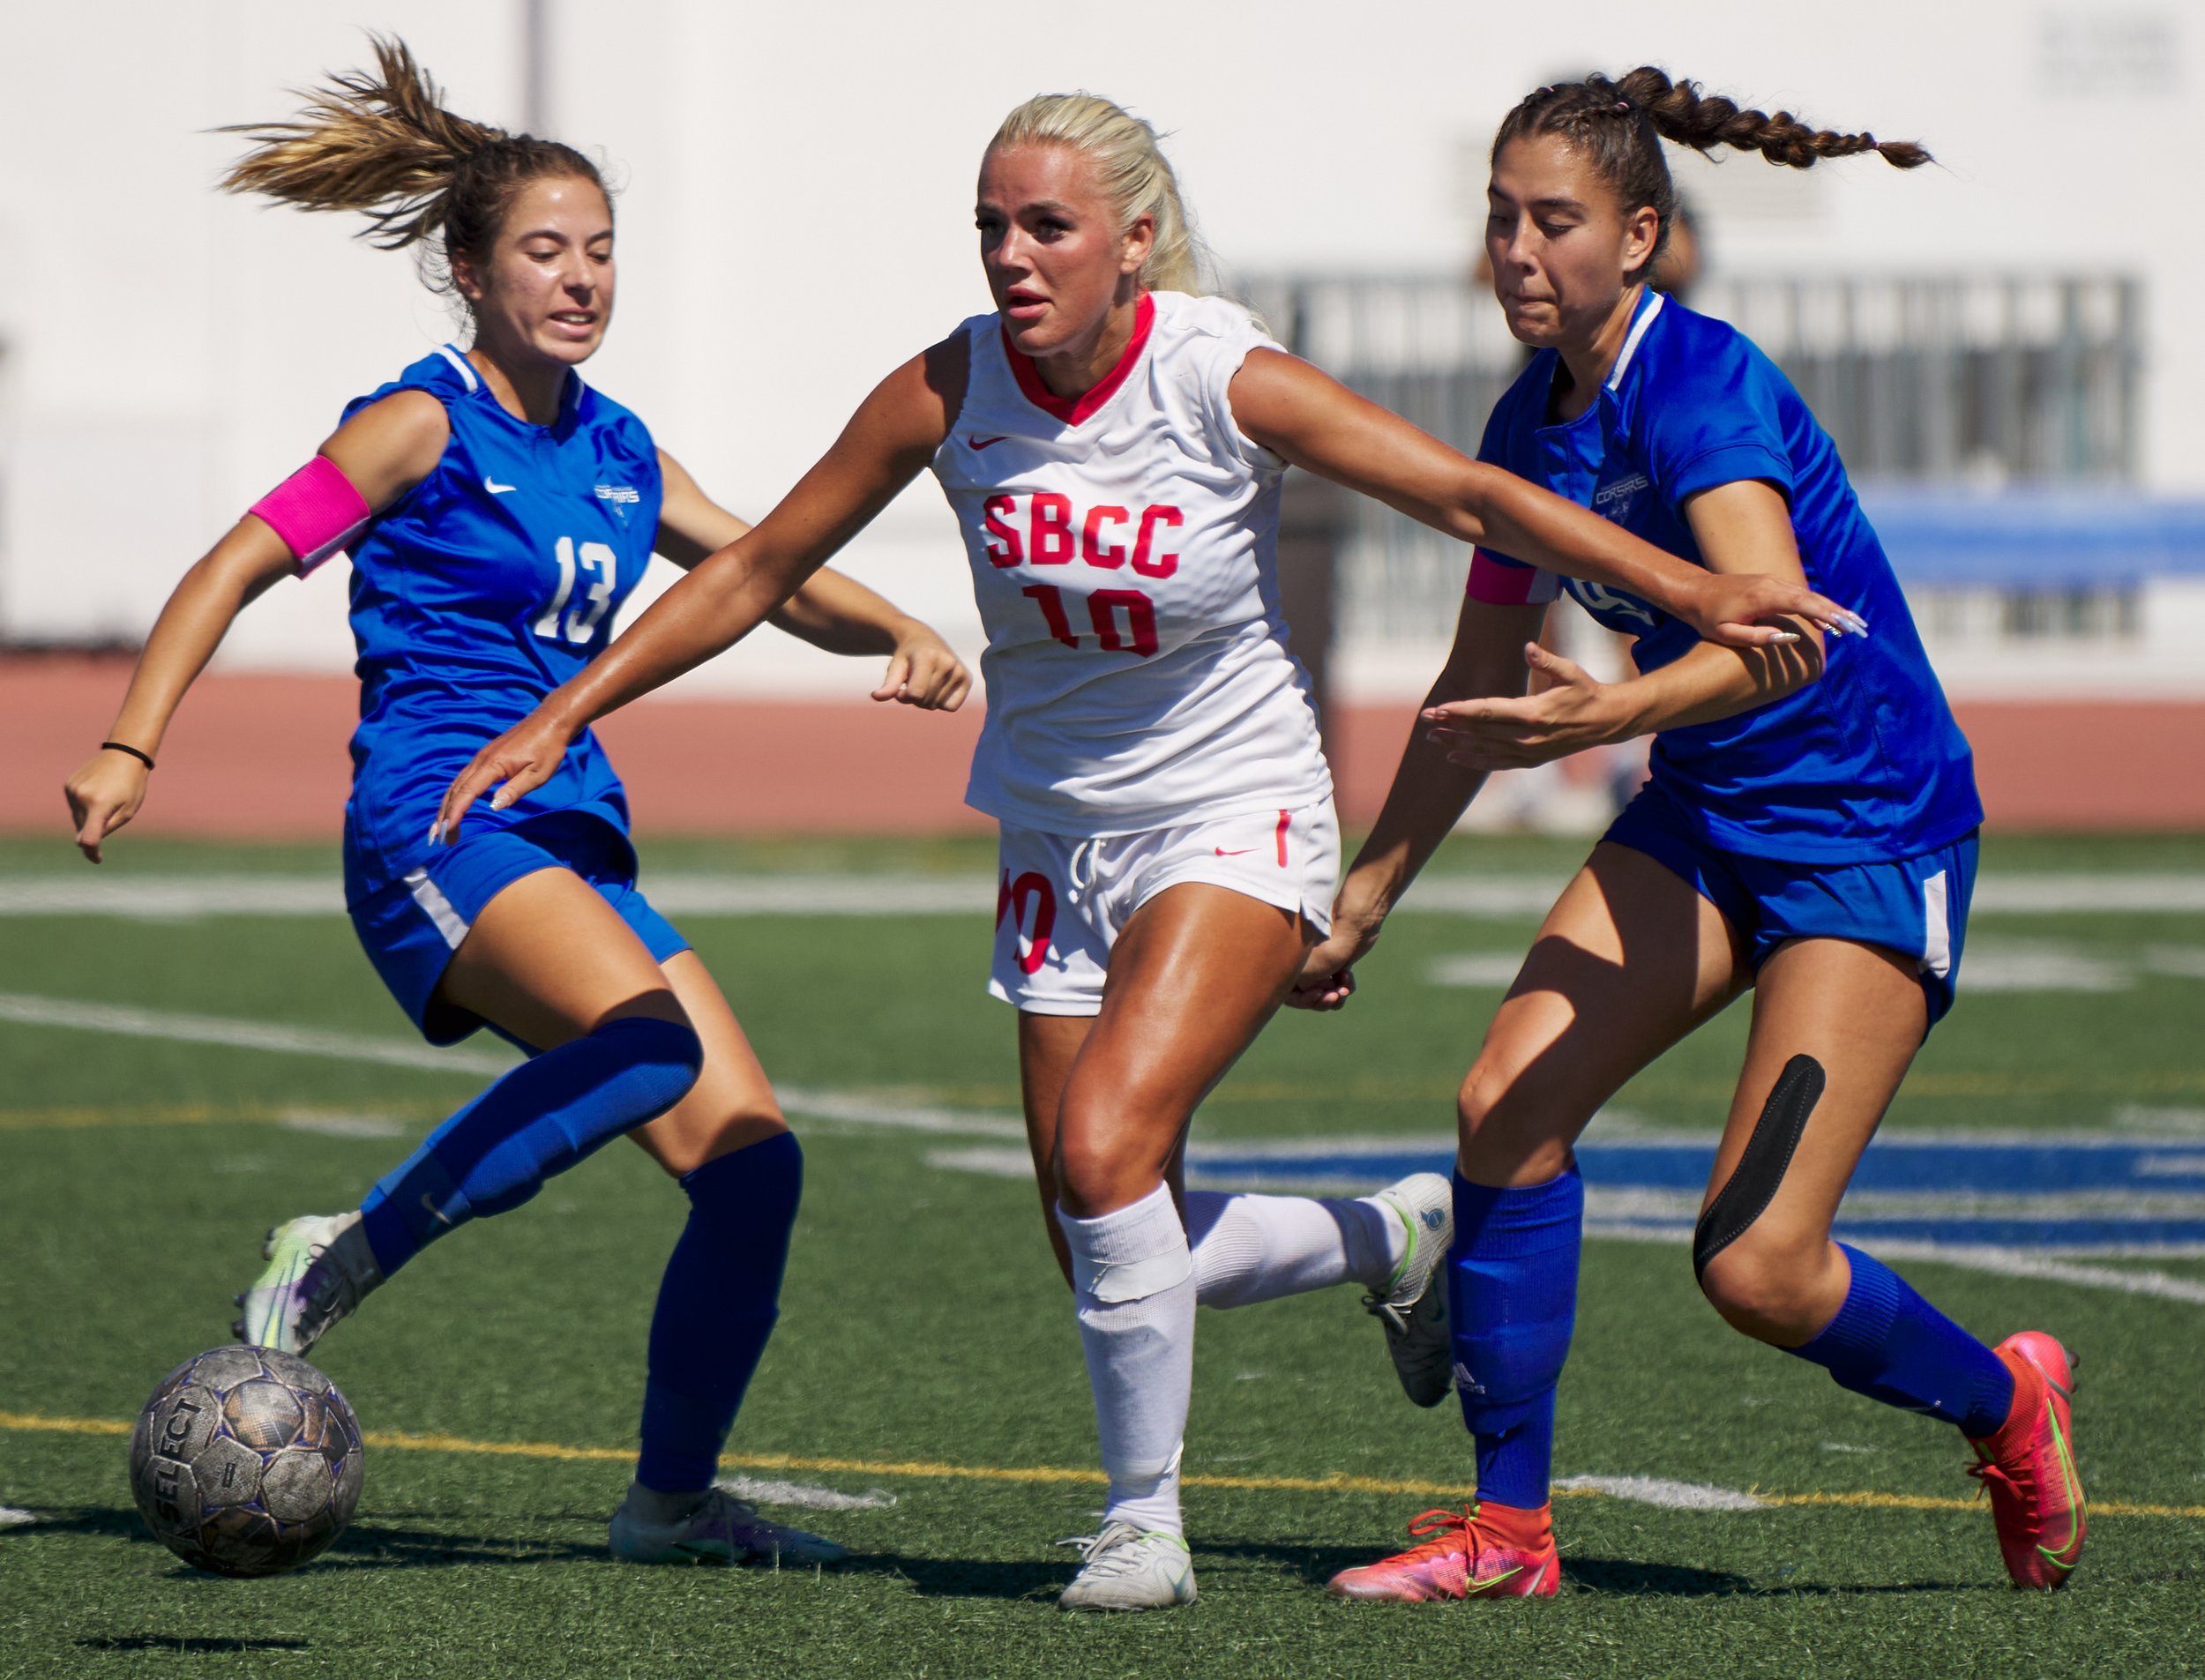  Santa Barbara City College Vaqueros' Helene Lervik keeps control of the ball away from the Santa Monica College Corsairs' Sophie Doumitt (left) and Alexia Mallahi (right) during the women's soccer game on Tuesday, Sept. 20, 2022, at Corsair Field in